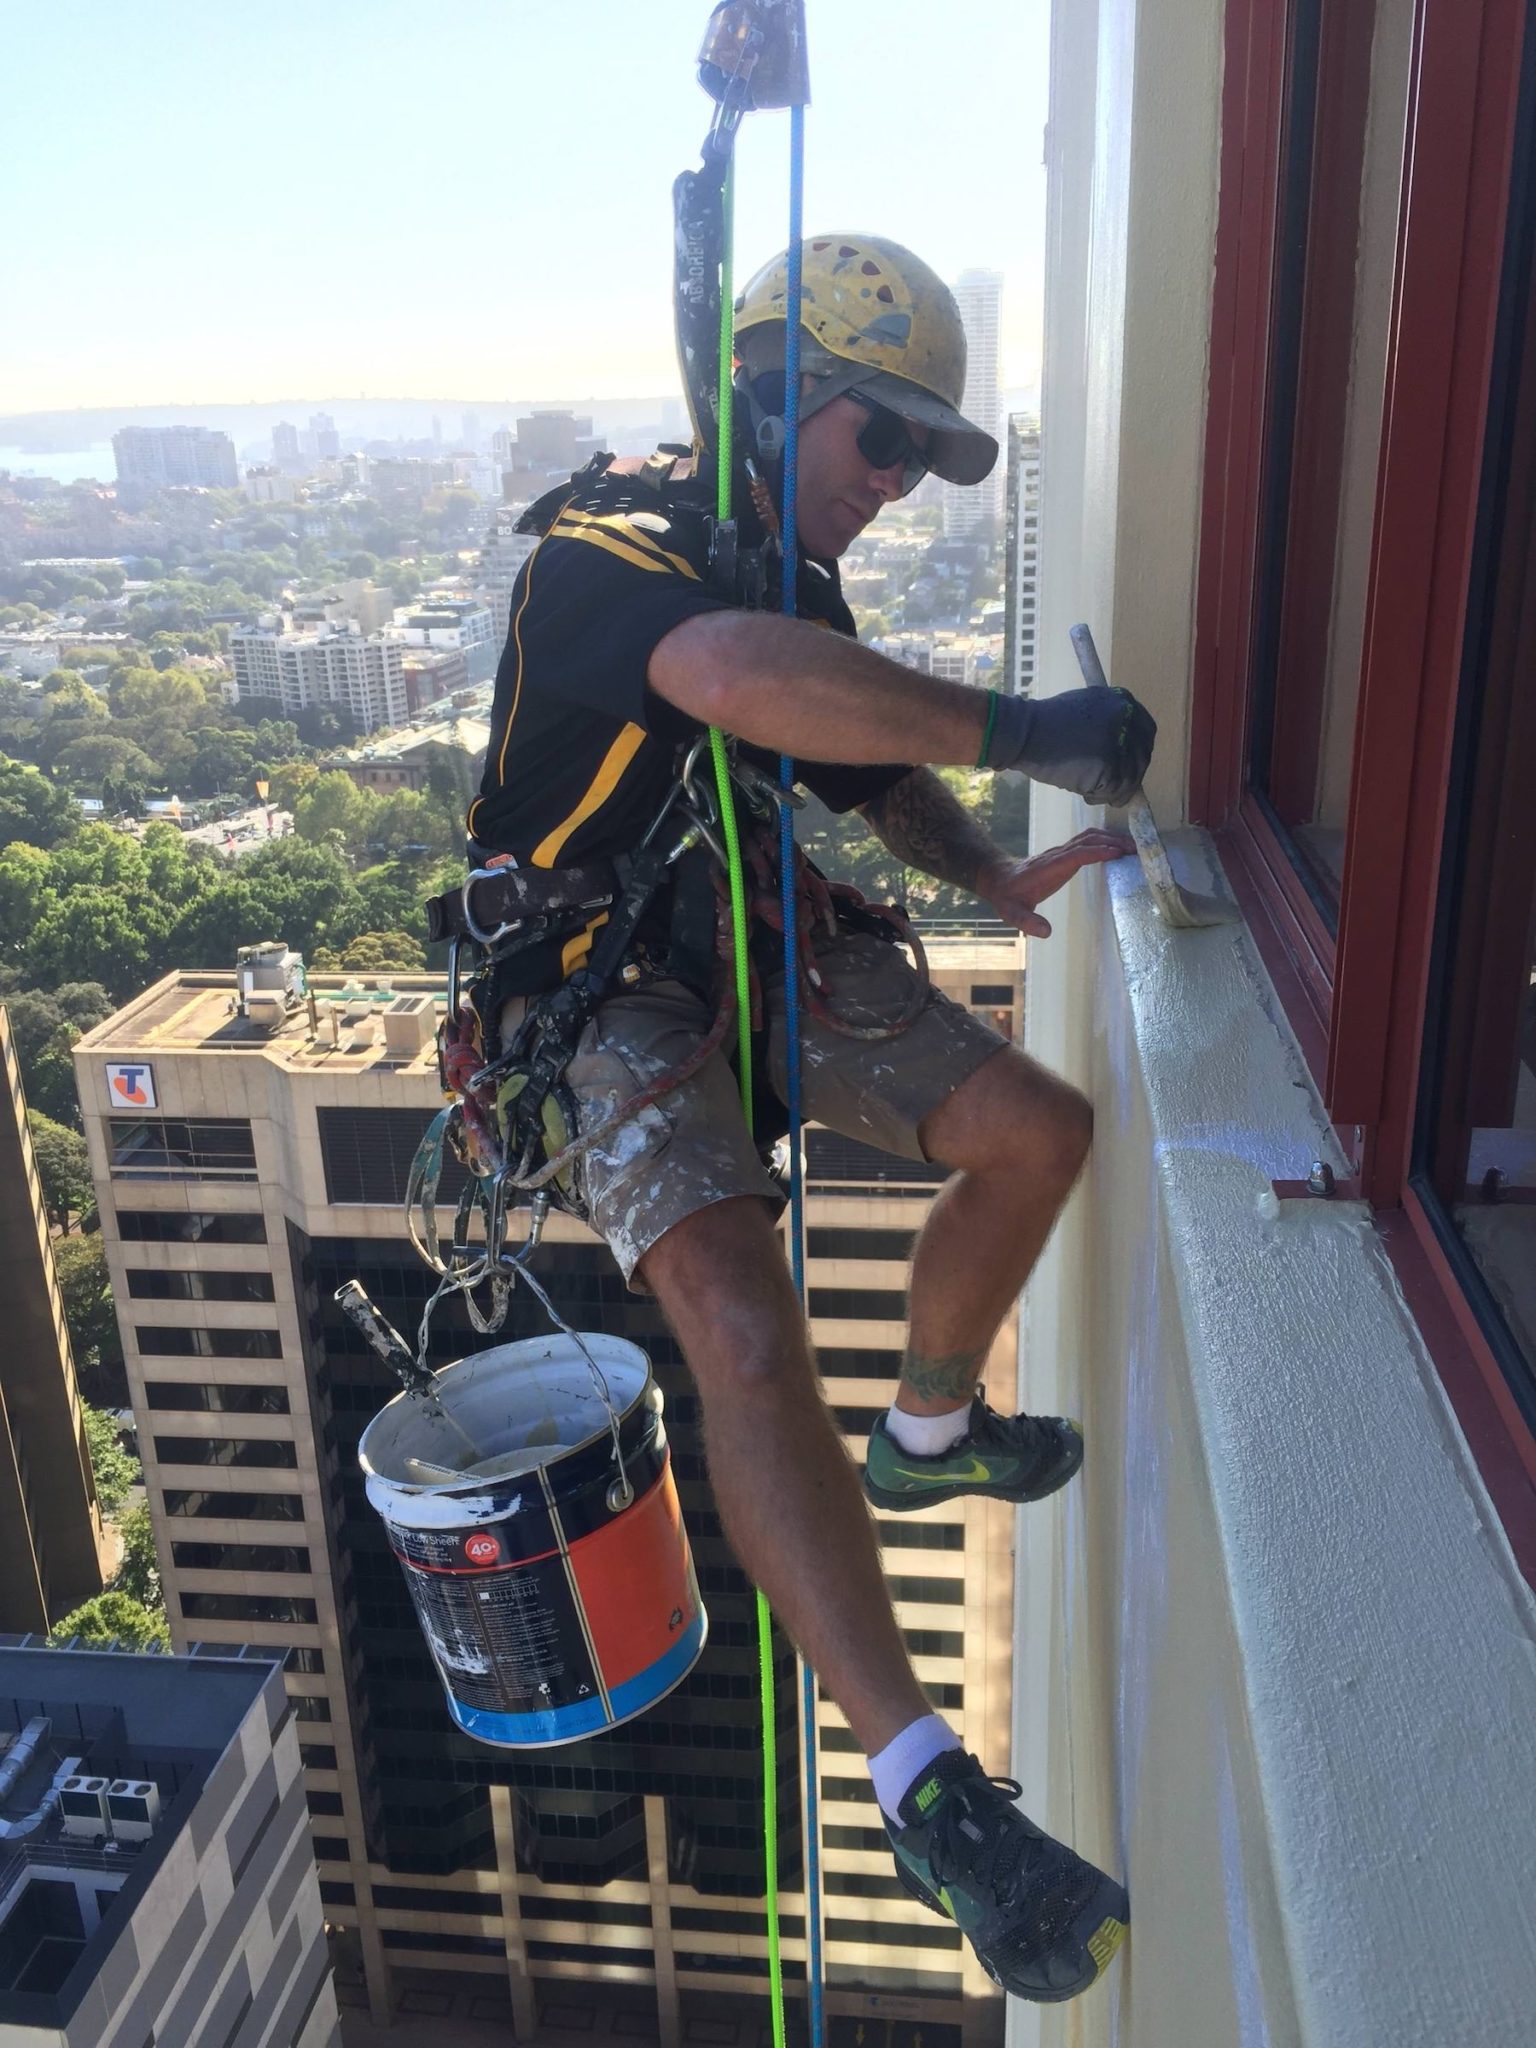 The Real Rope Access Painters Of Sydney!